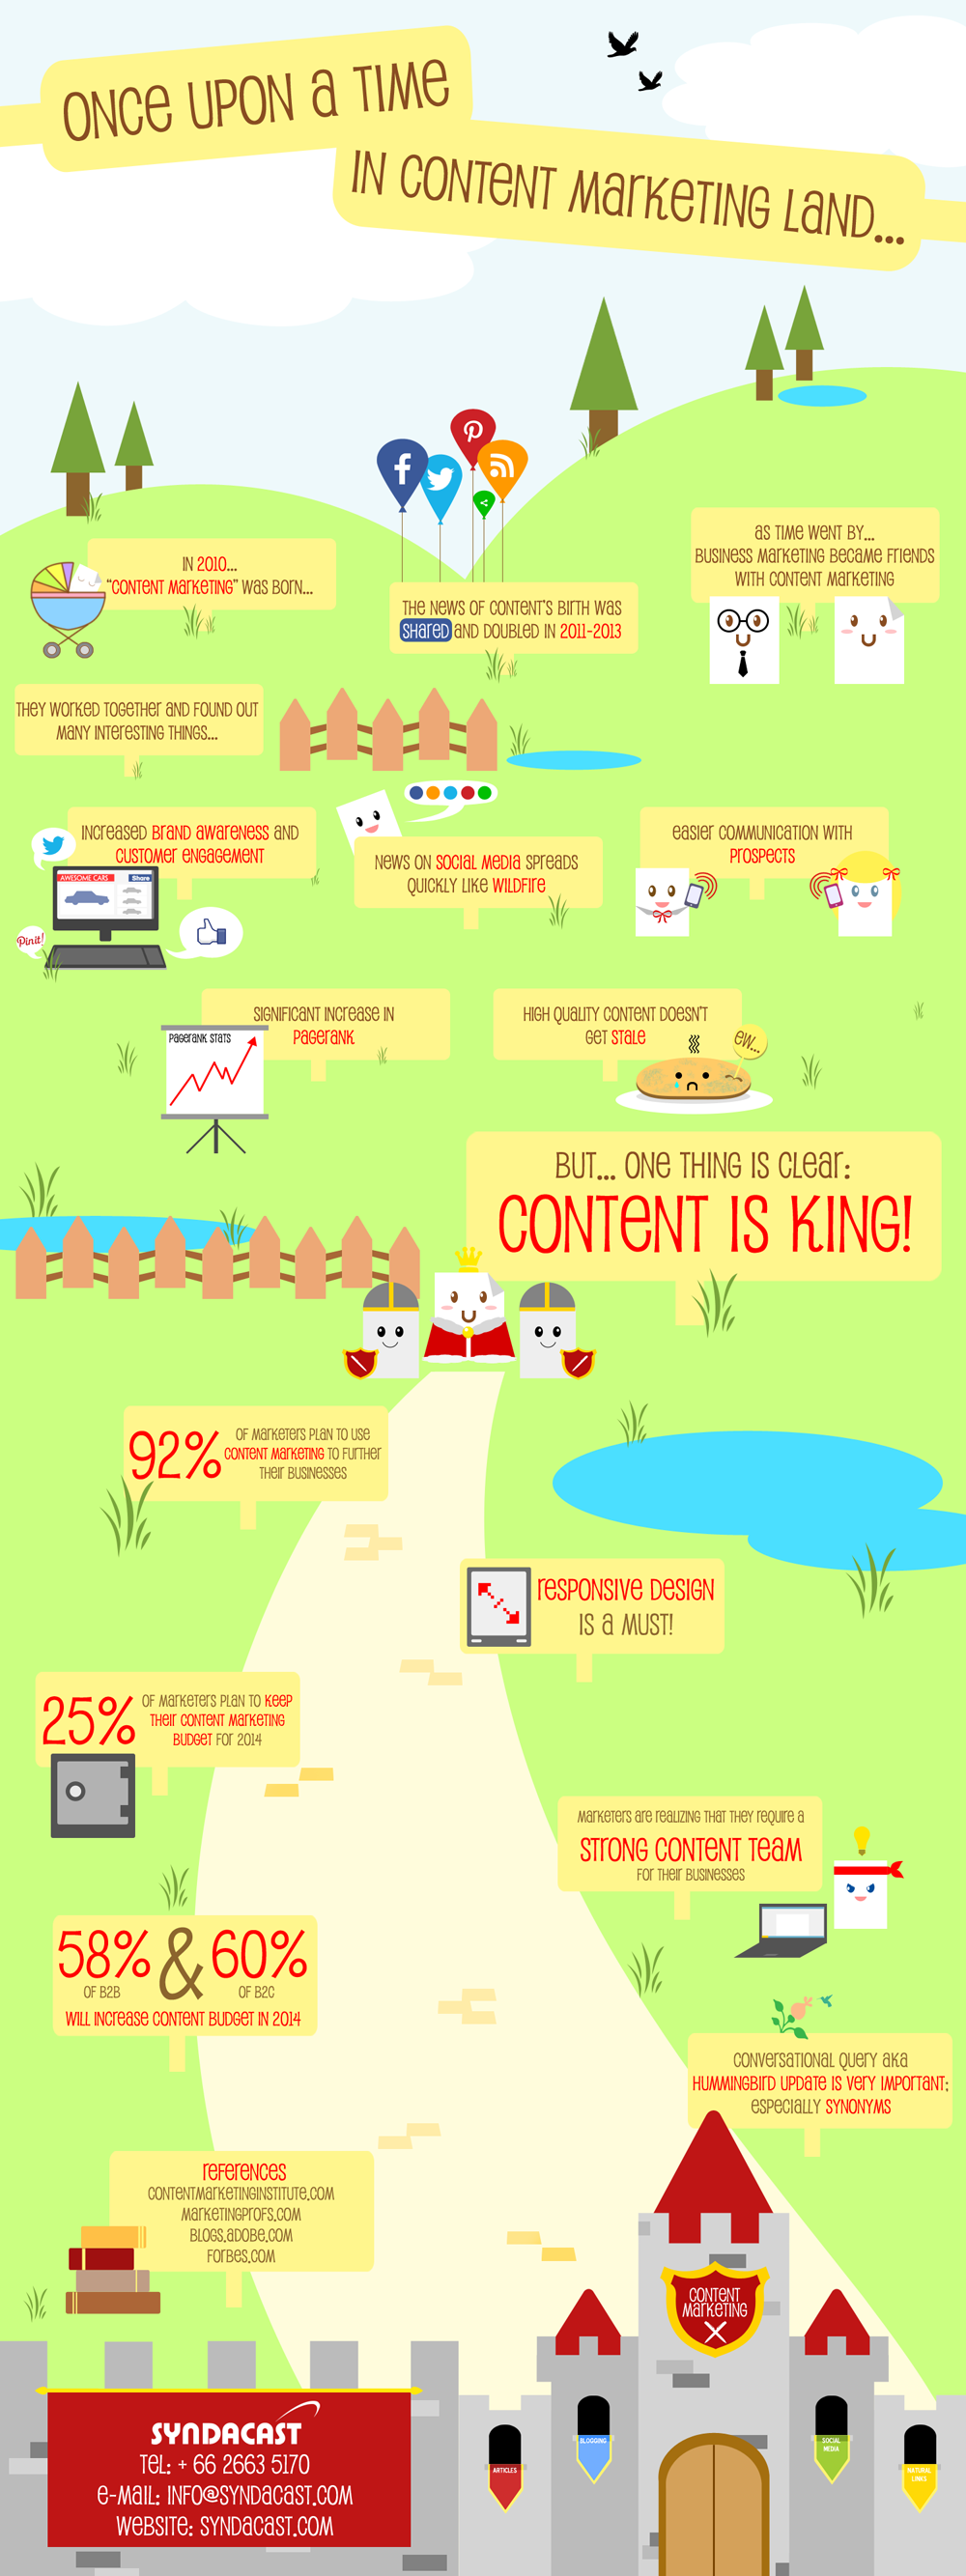 Once Upon A Time in #ContentMarketing Land - #infographic #socialmedia